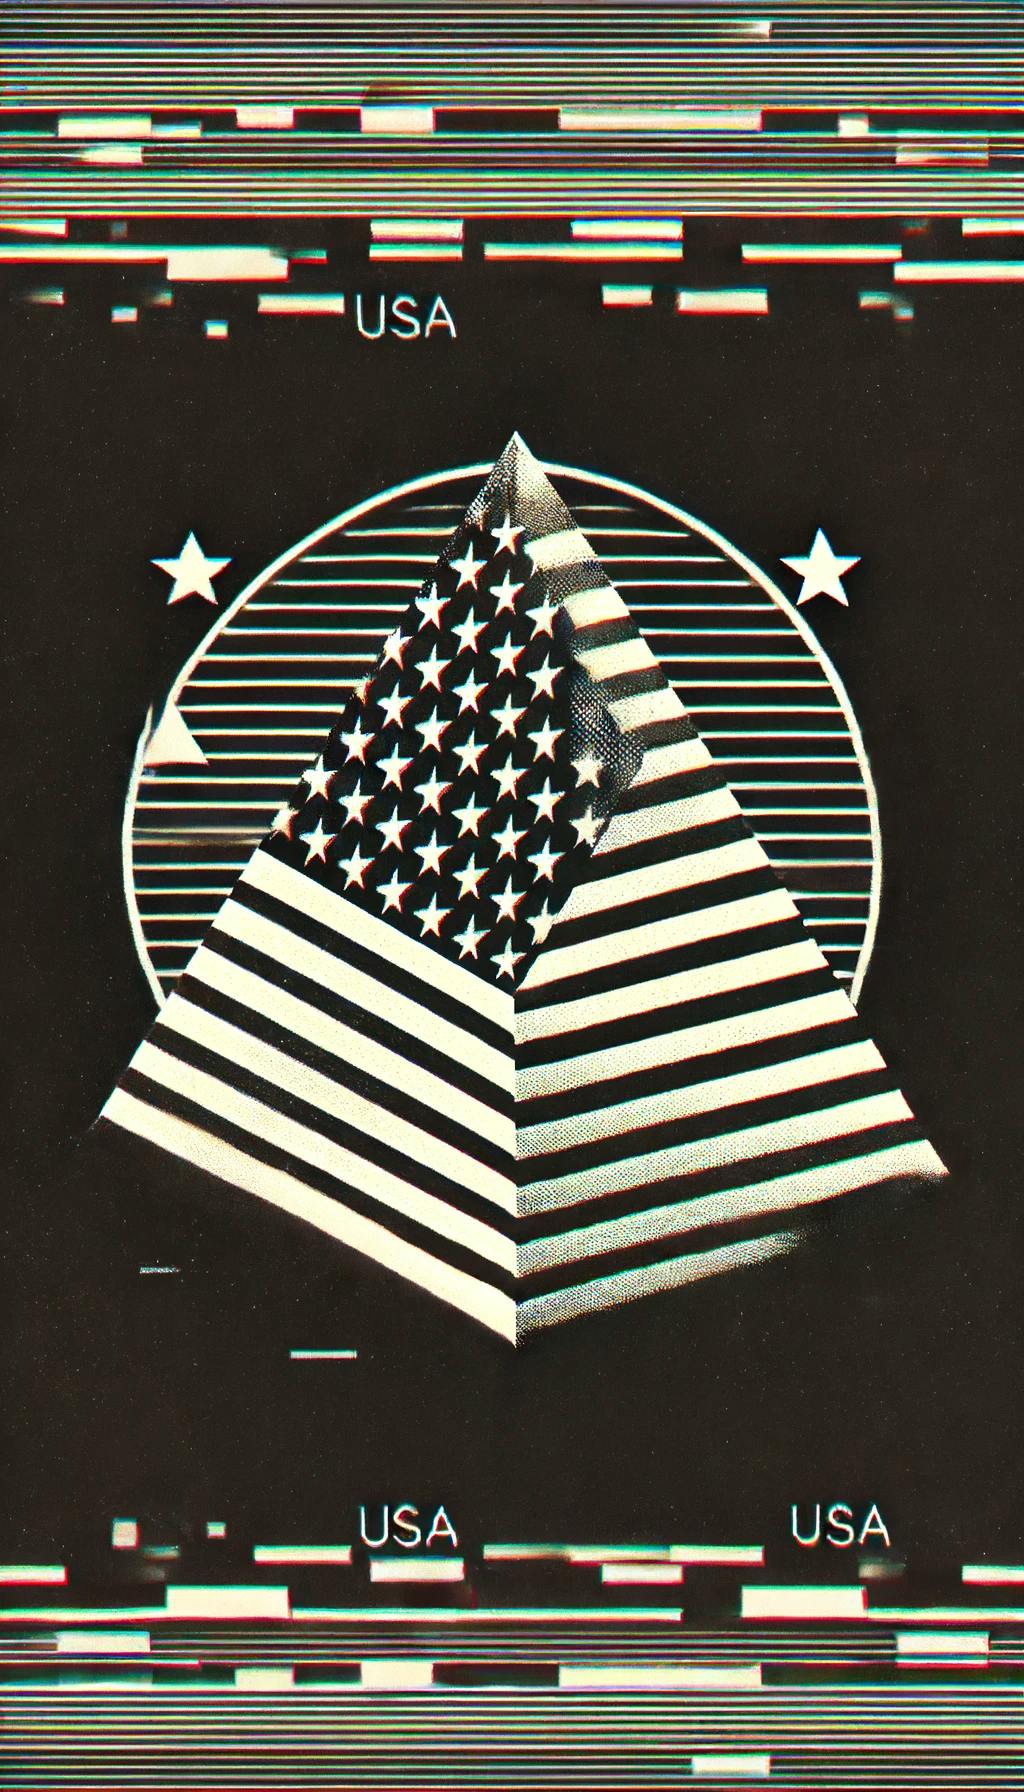 DALL·E 2024-06-18 08.54.09 - Create an extremely simple and elegant glitch art style image with a USA patriotic theme in black and white, featuring a clear 3D tetrahedron. Focus o.webp